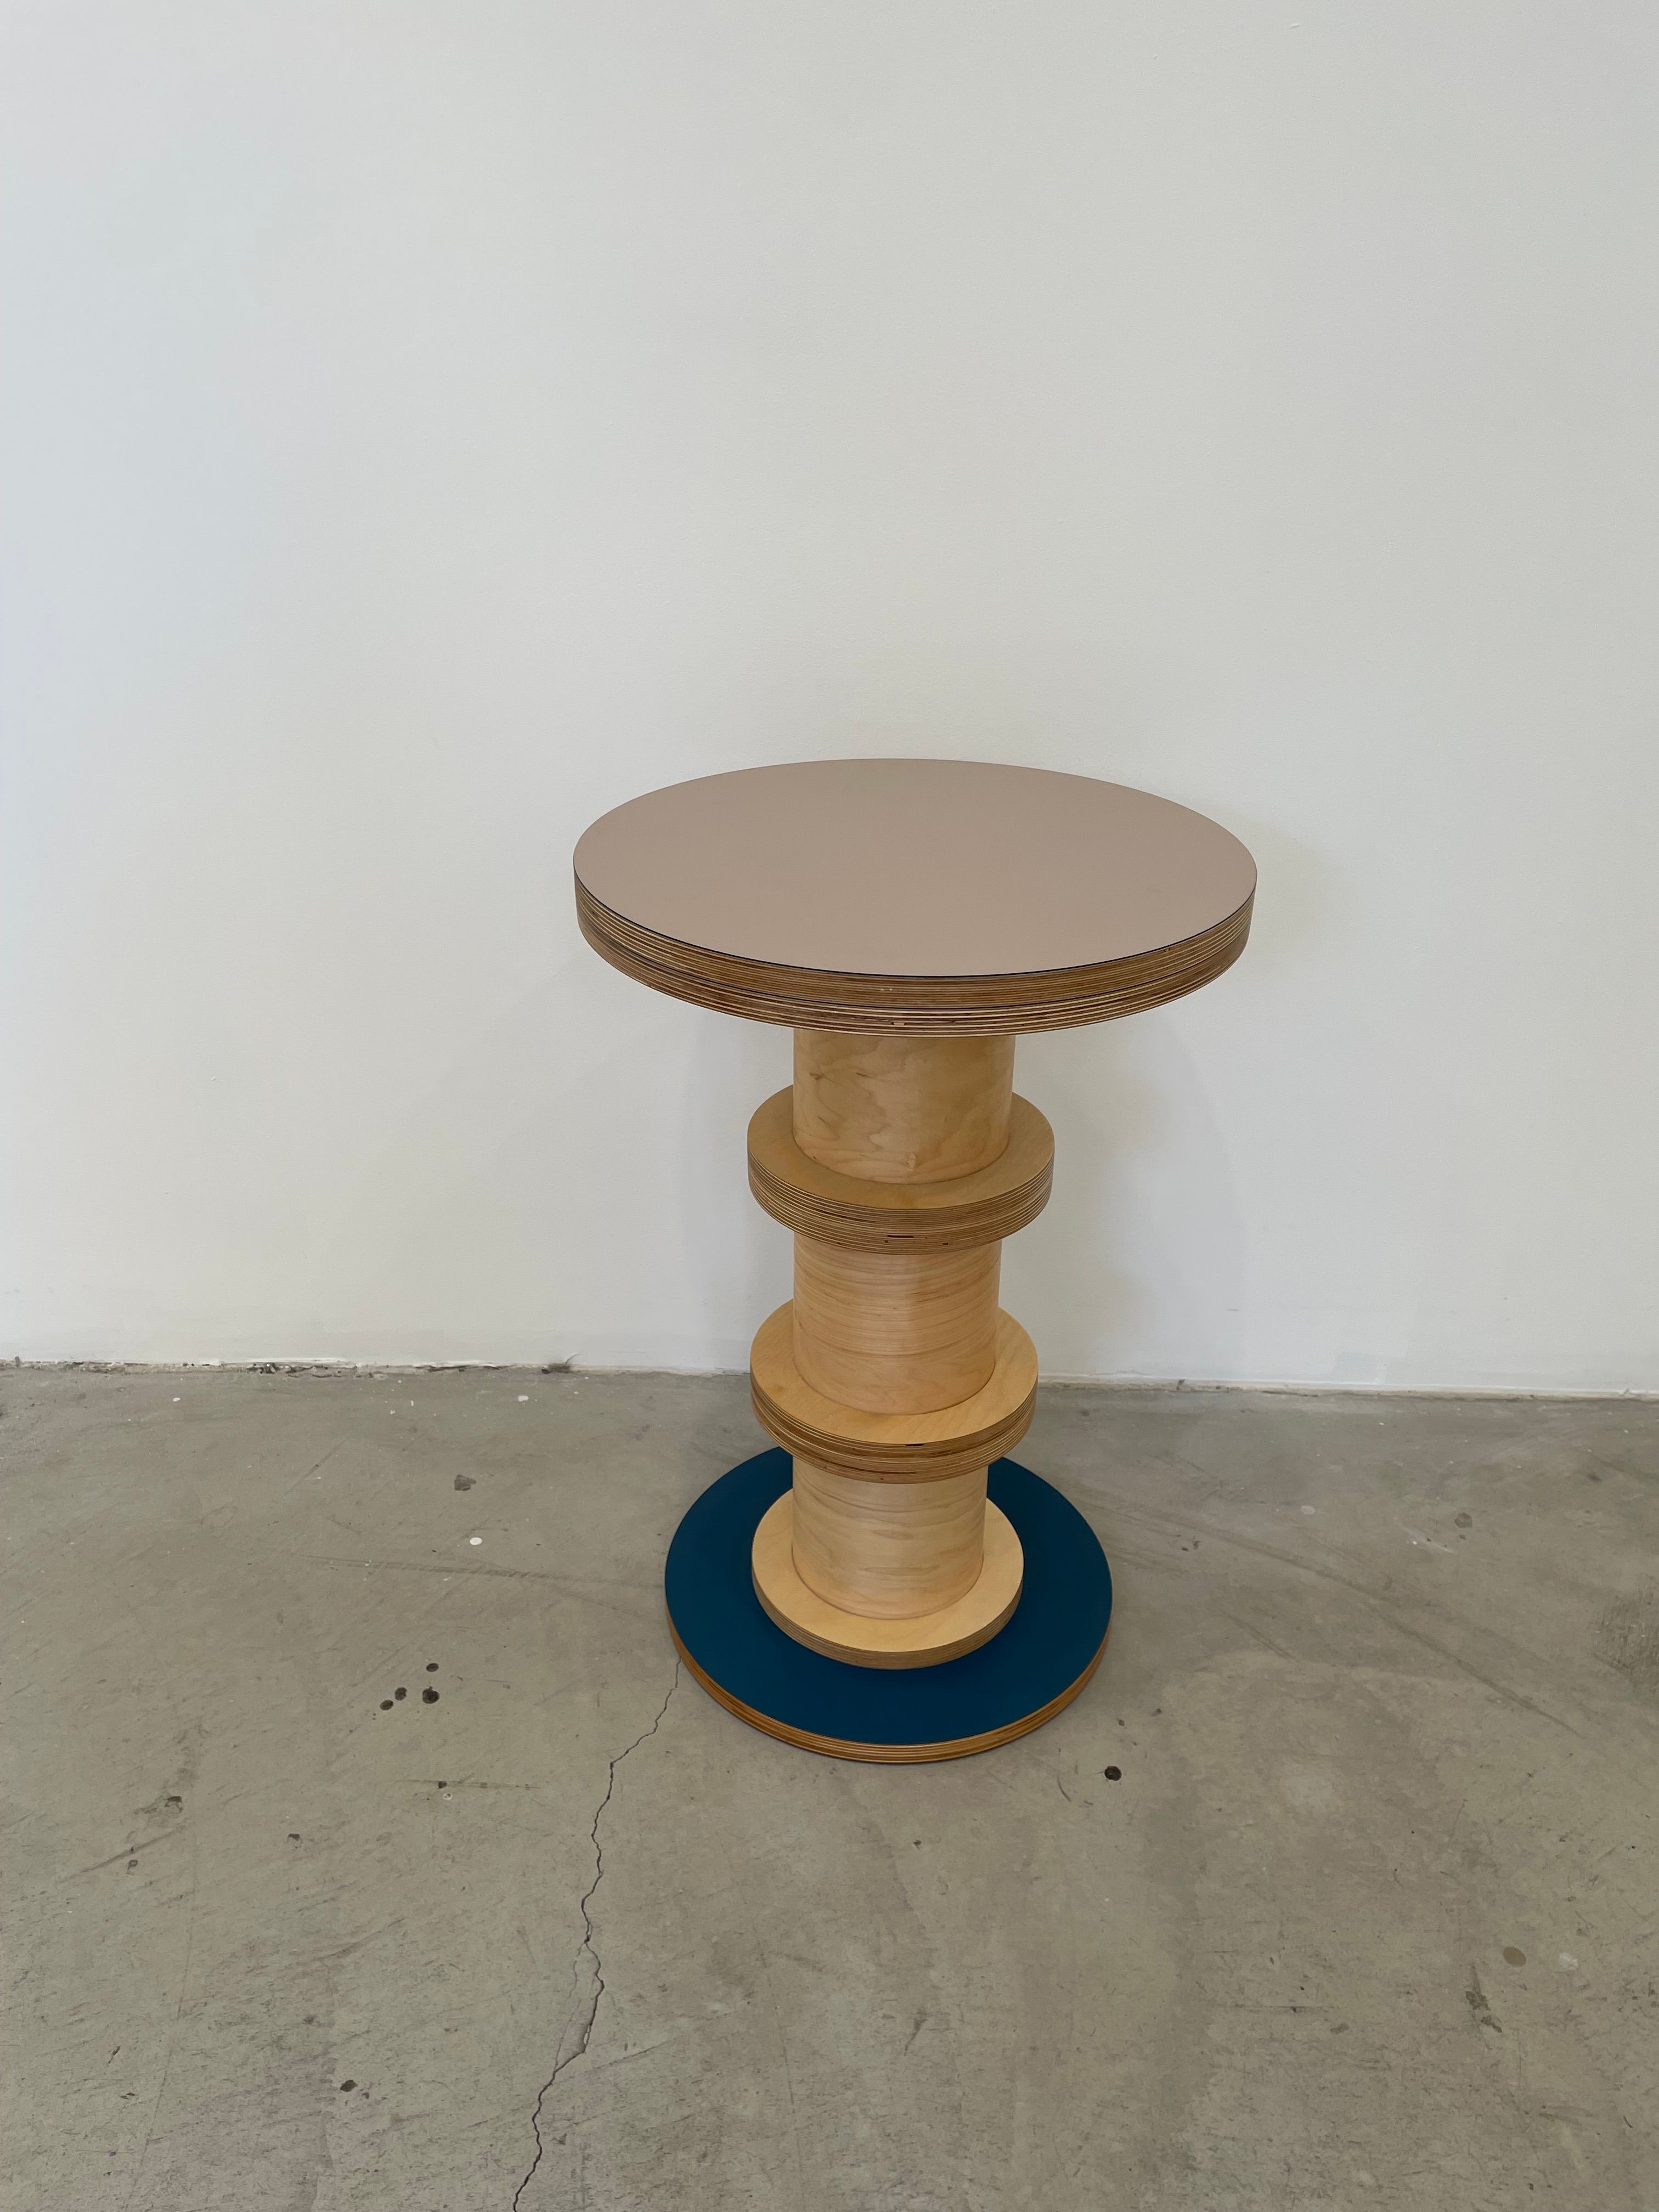  Round Column Table - Braindead Fabrications Gallery Show product image 0